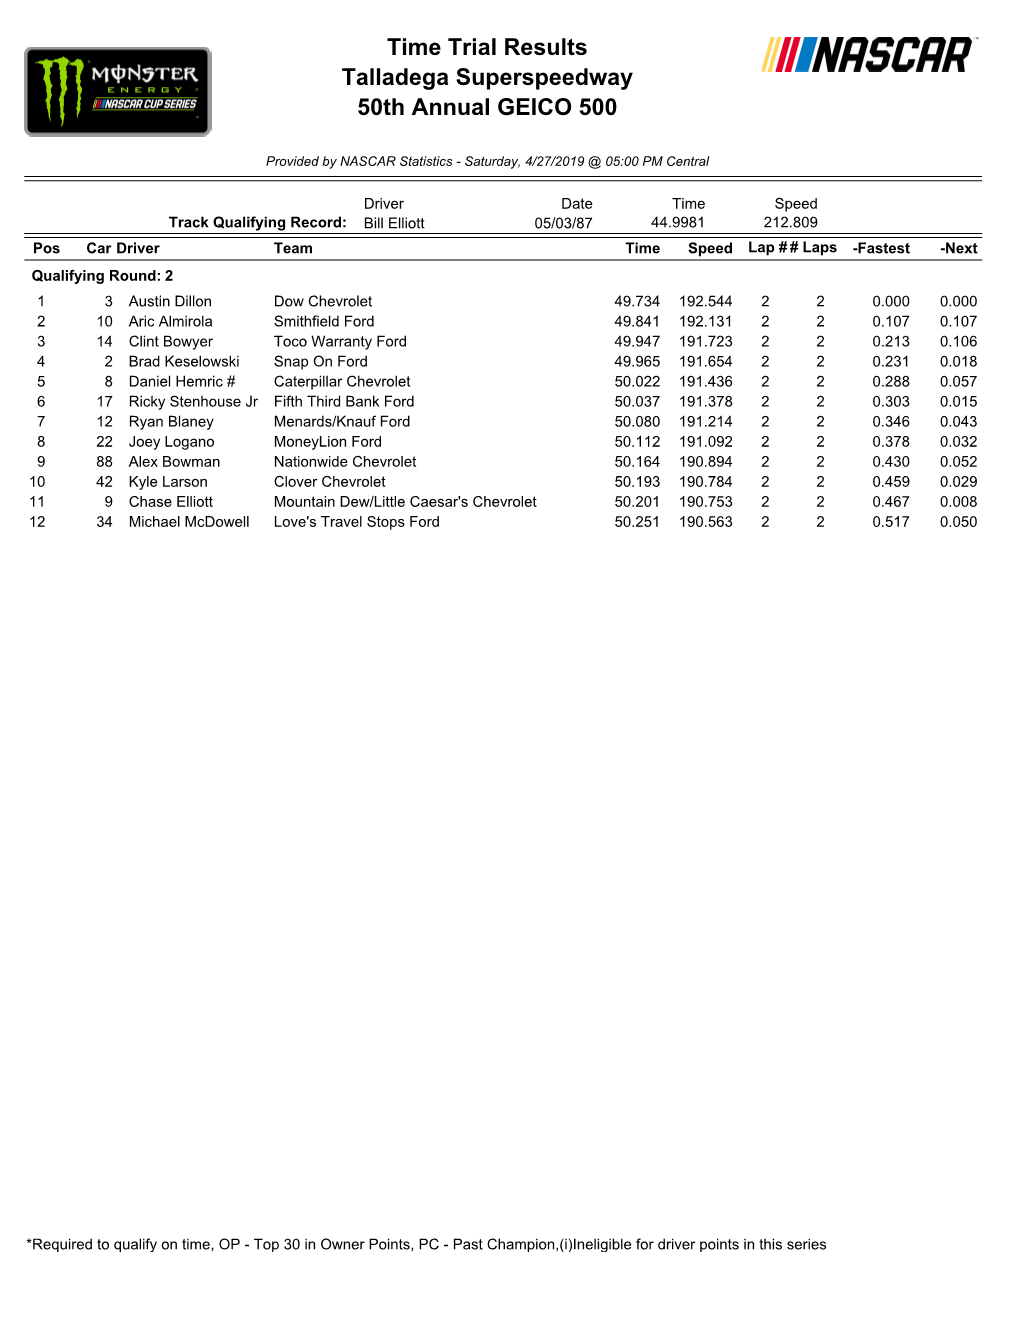 Time Trial Results Talladega Superspeedway 50Th Annual GEICO 500